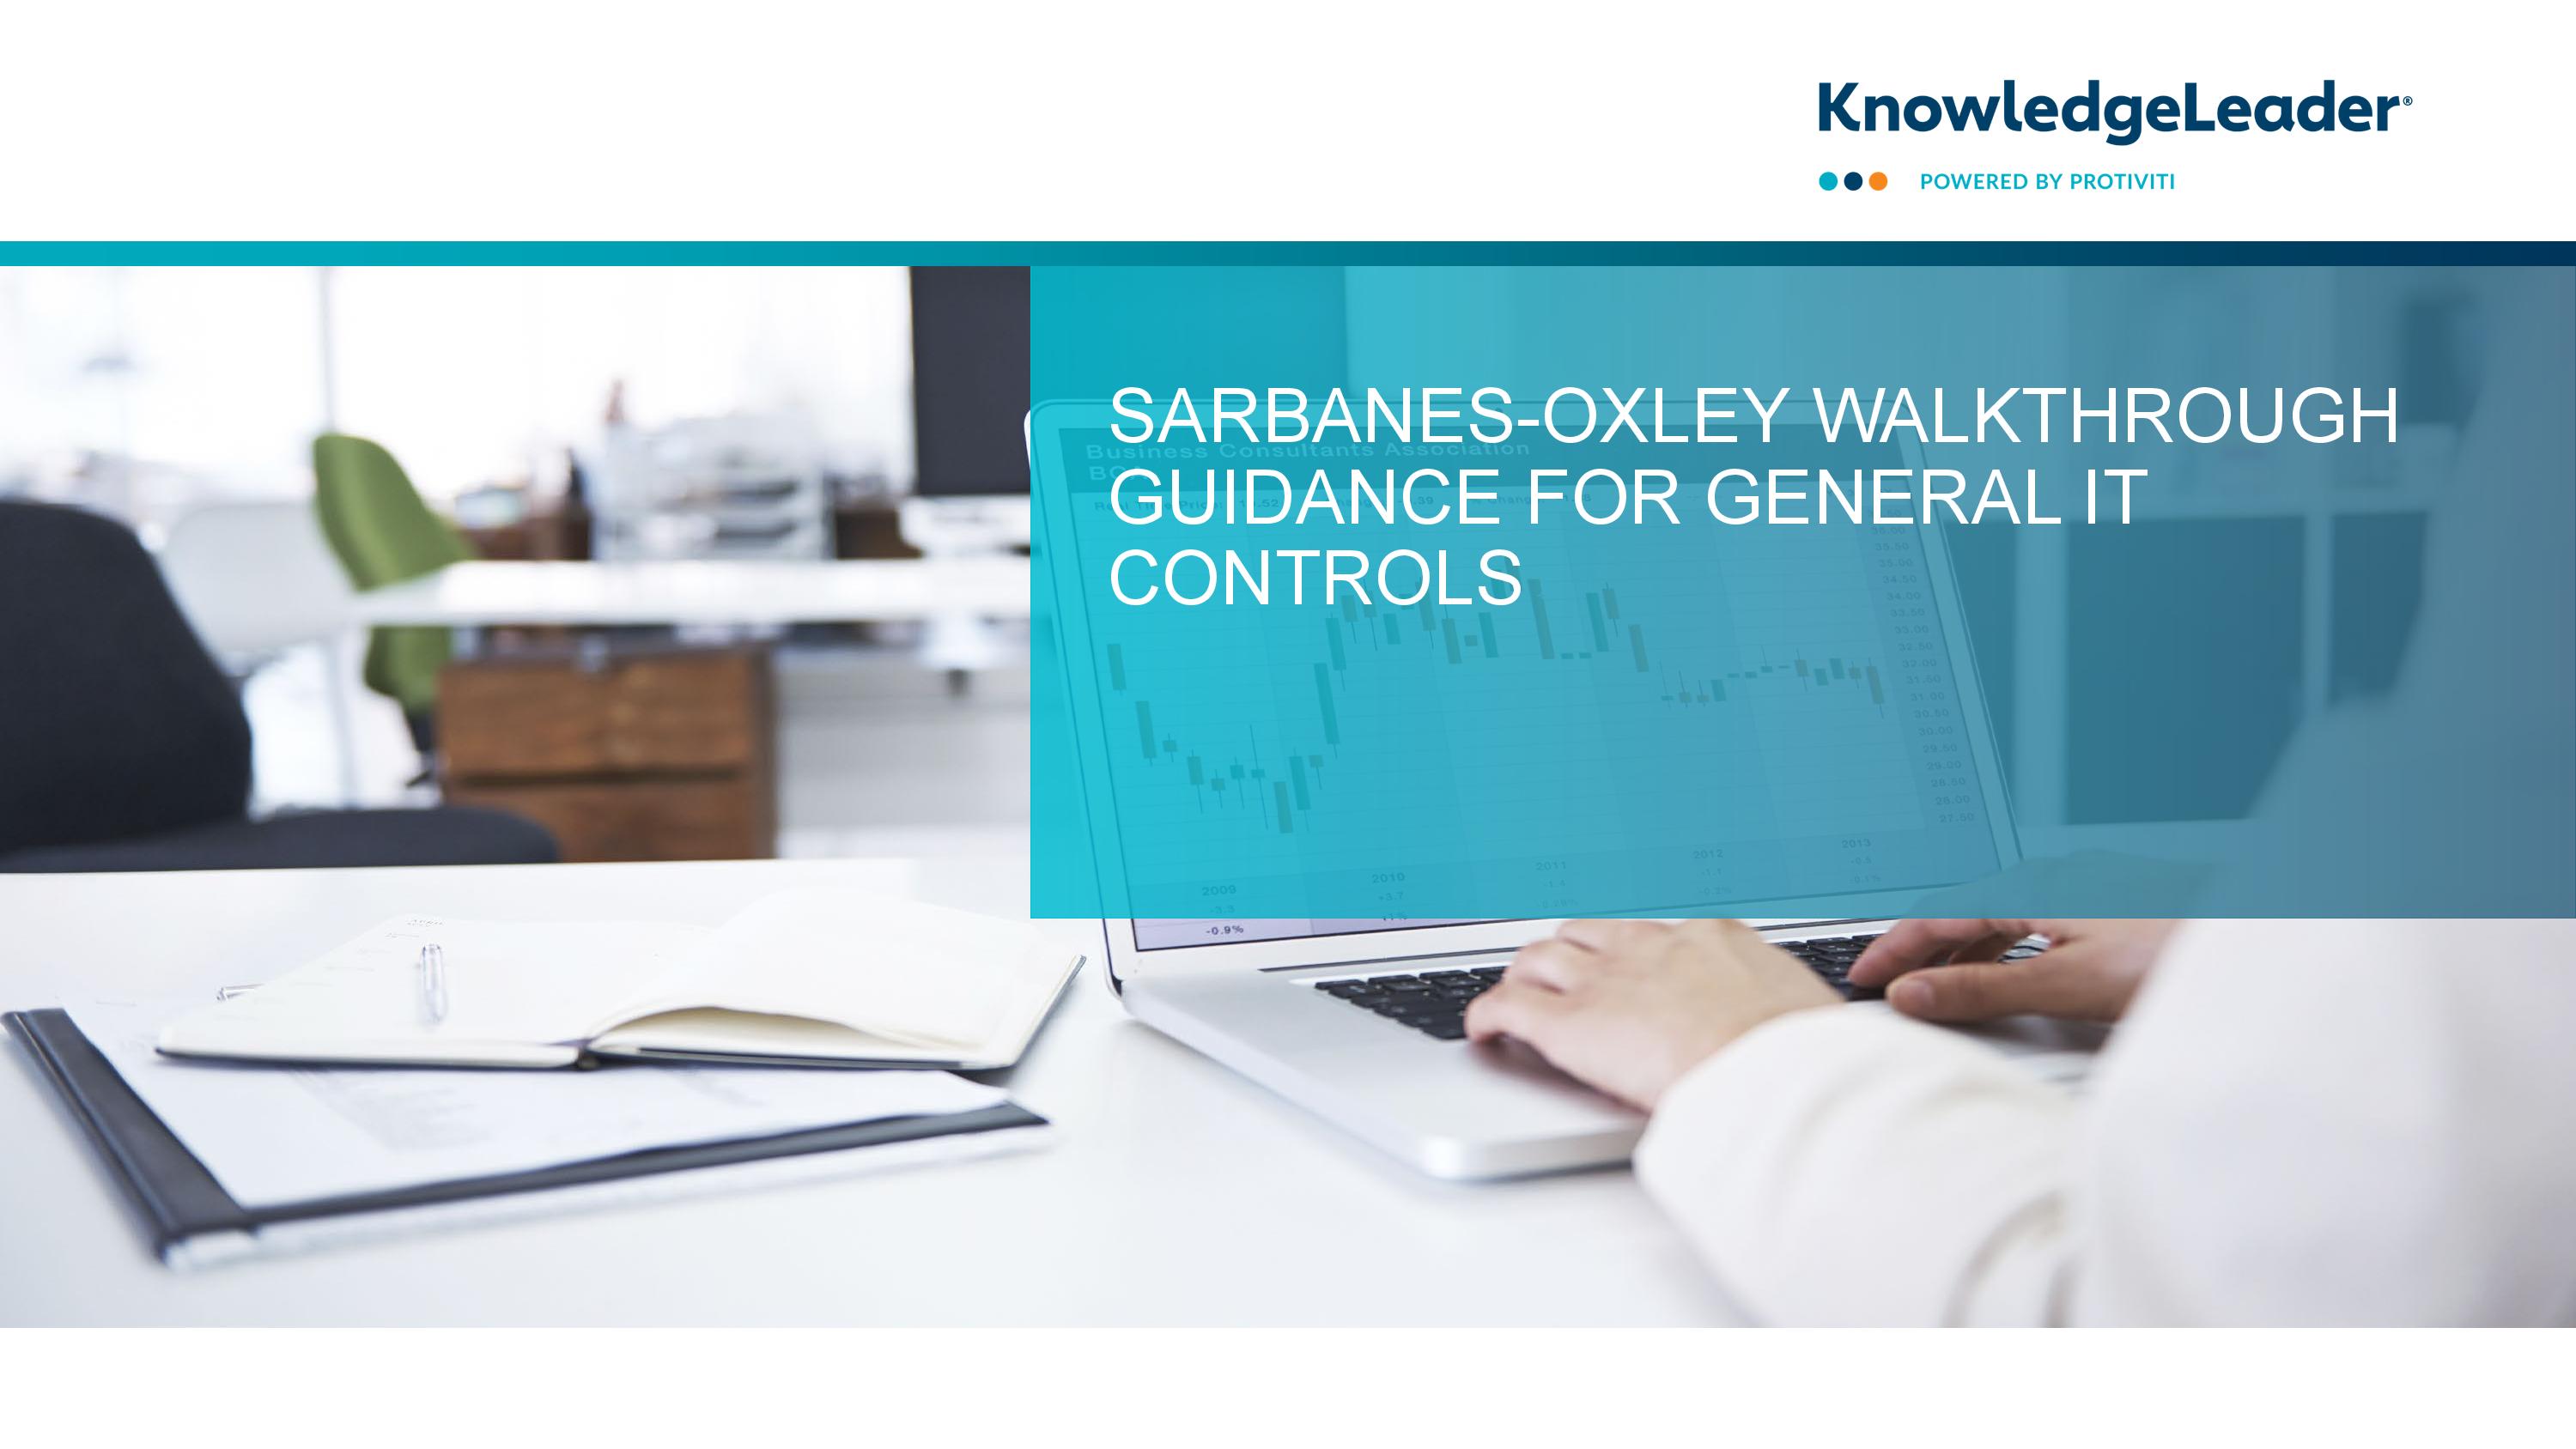 Screenshot of the first page of Sarbanes Oxley Walkthrough Guidance for General IT Controls